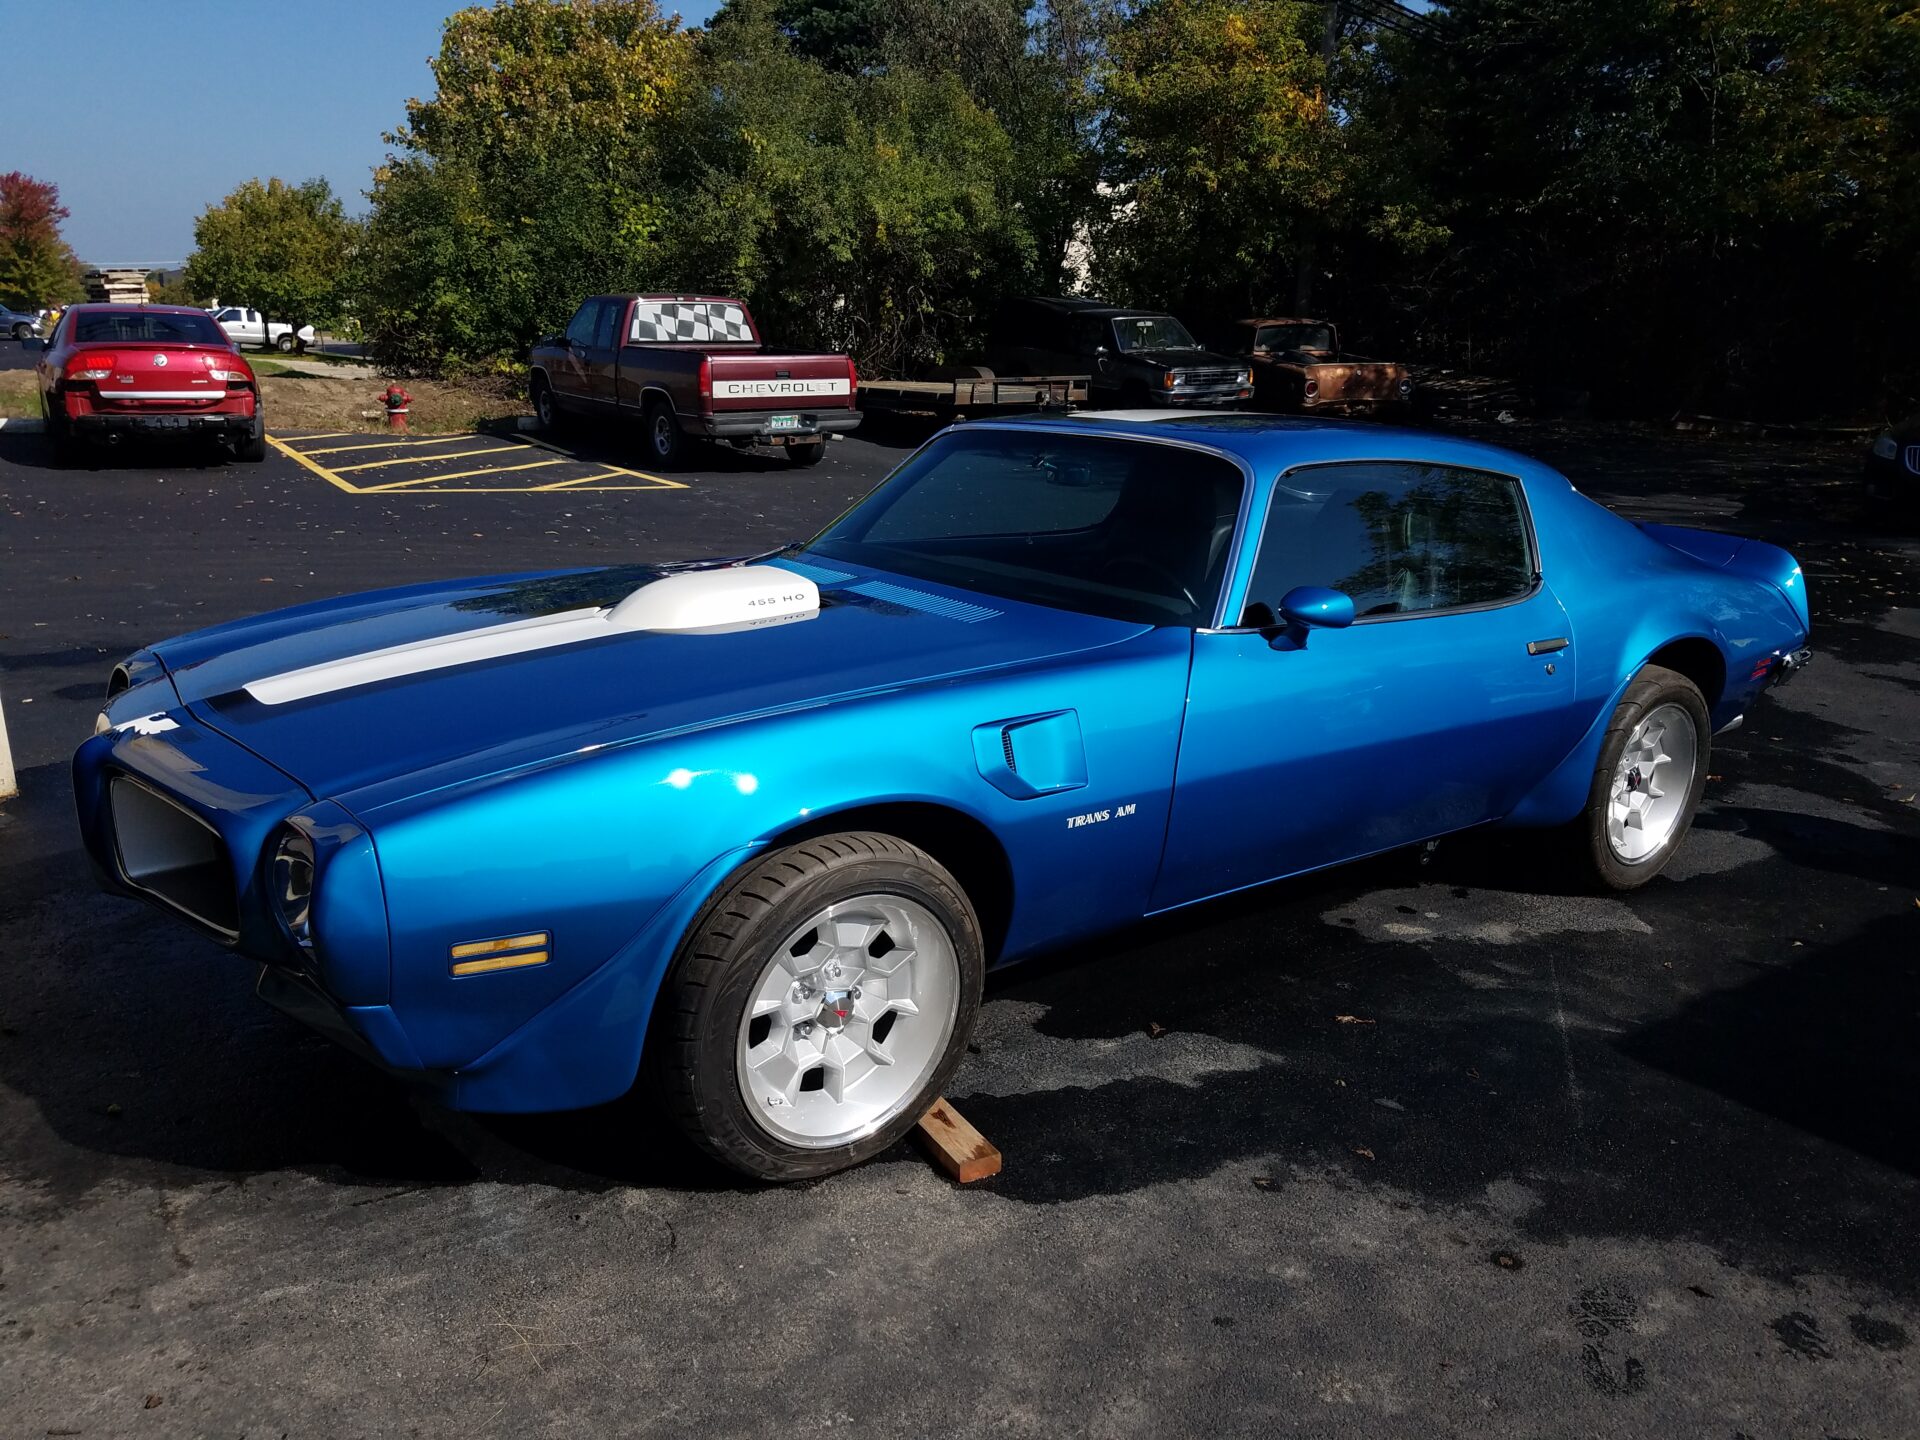 A fully completed 1971 Pontiac Trans Am